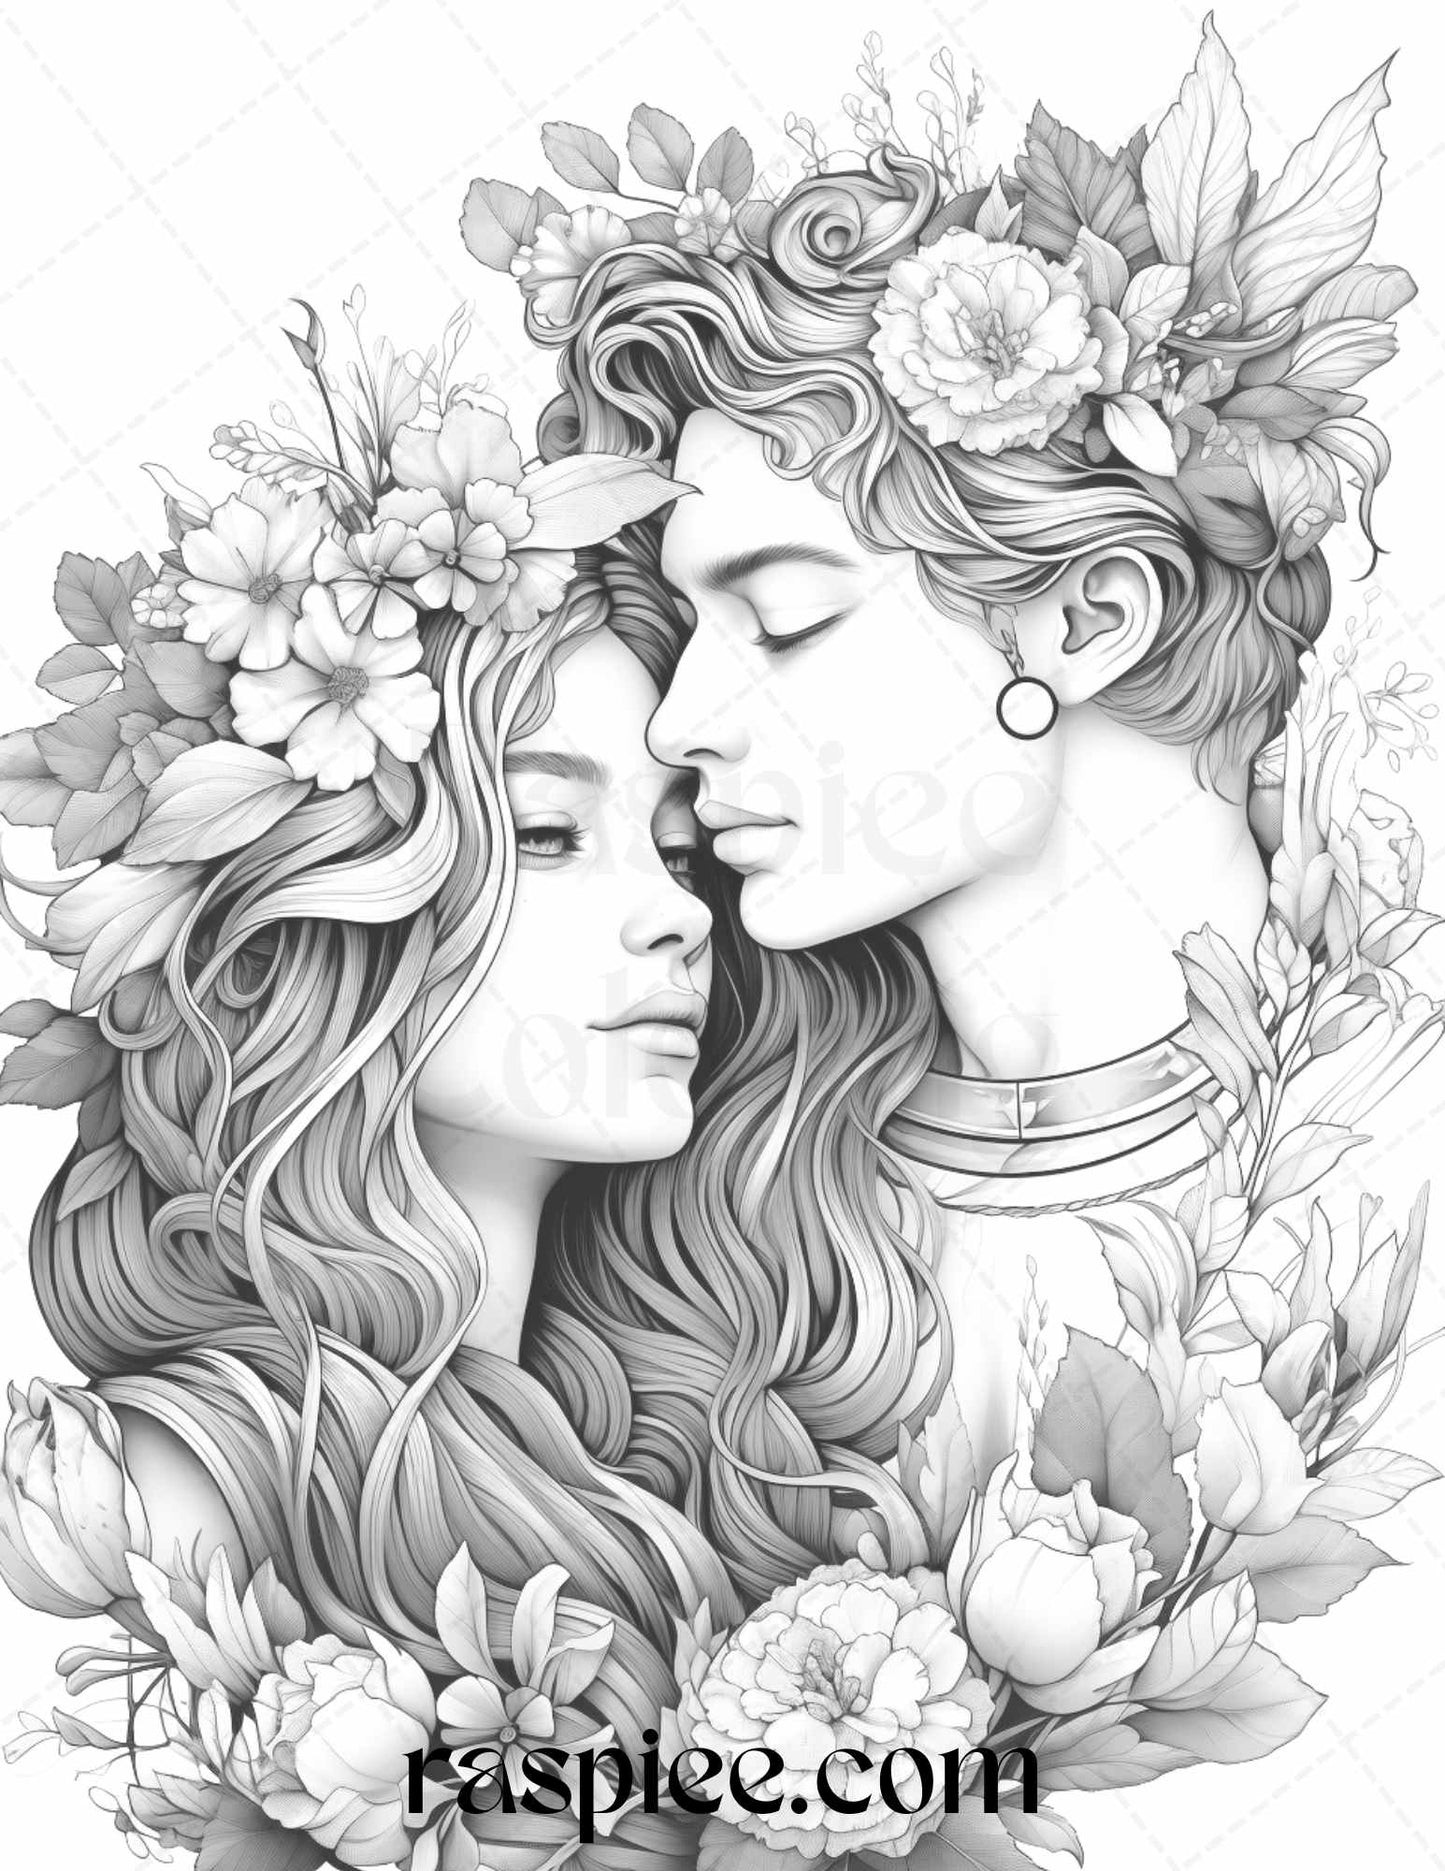 Romantic Couple Flowers Grayscale Coloring Pages for Adults, Floral Illustrations in High-Quality Grayscale Prints, Relationship Coloring Book for Stress Relief, Flowers and Couples Coloring Bundle, Adult Coloring Pages with Romantic Themes, Printable Love Coloring Decorations